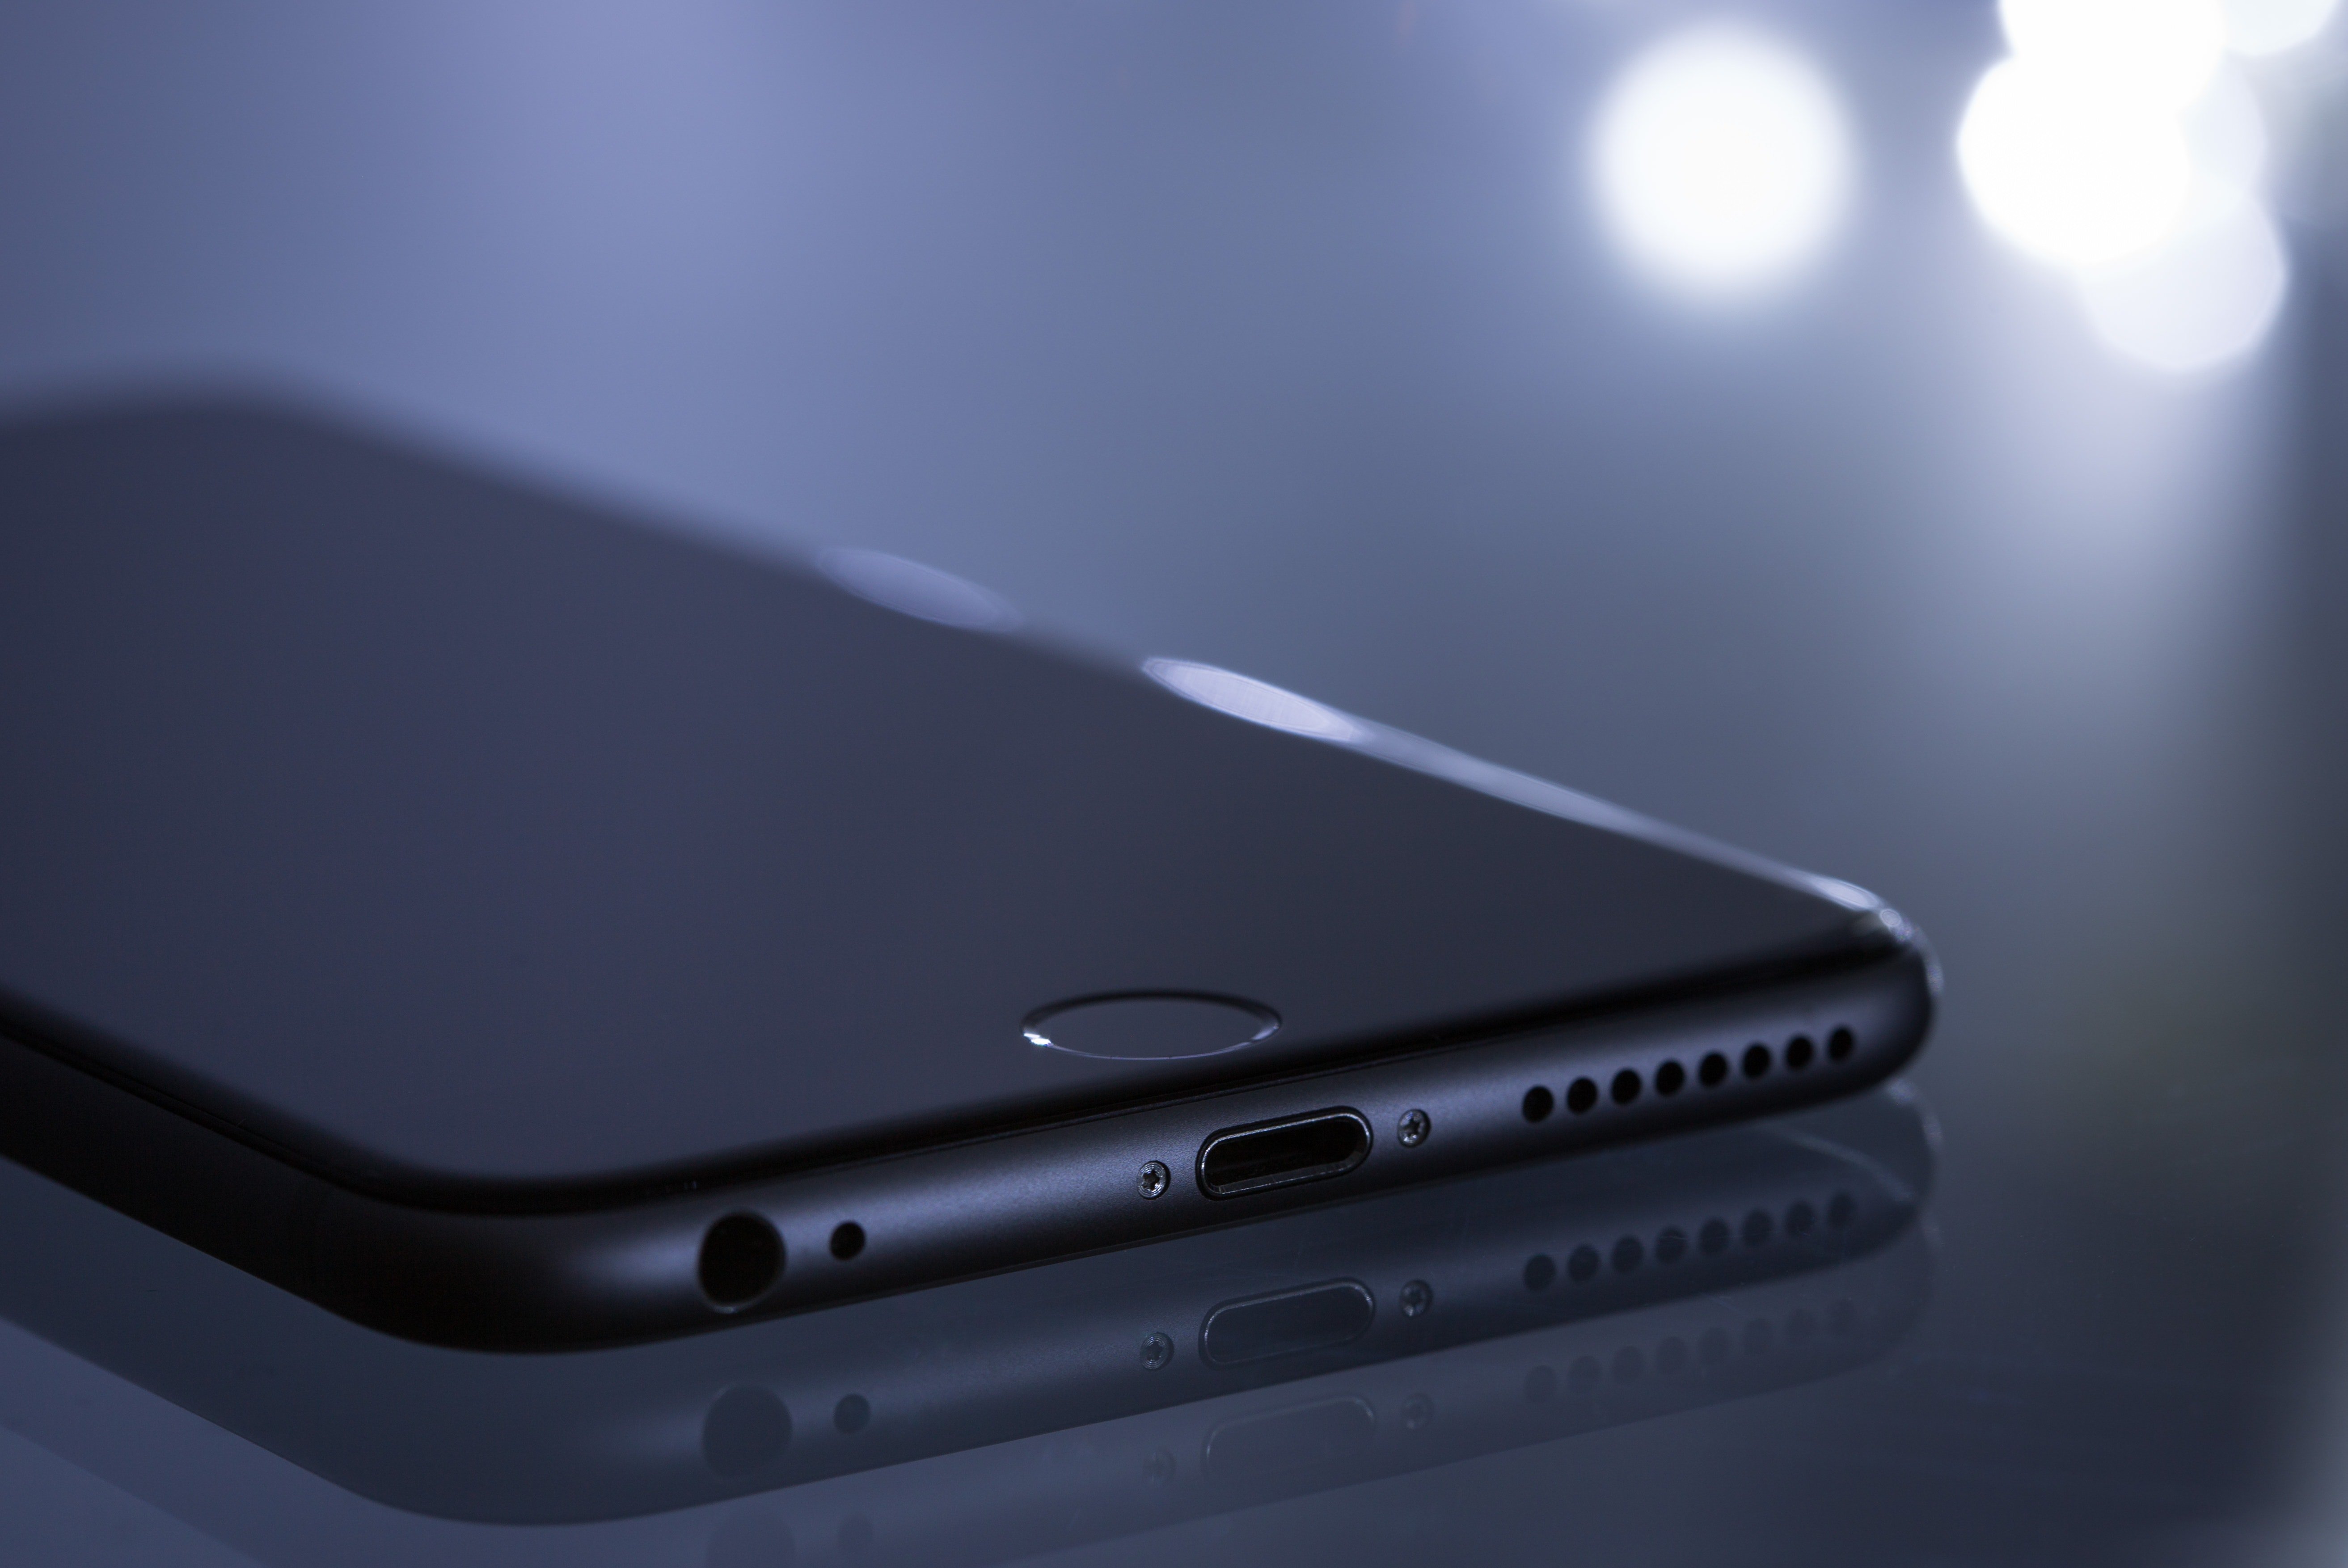 Pictured - A photo of a Space Gray iPhone 6 on the desk | Source: Pexels 